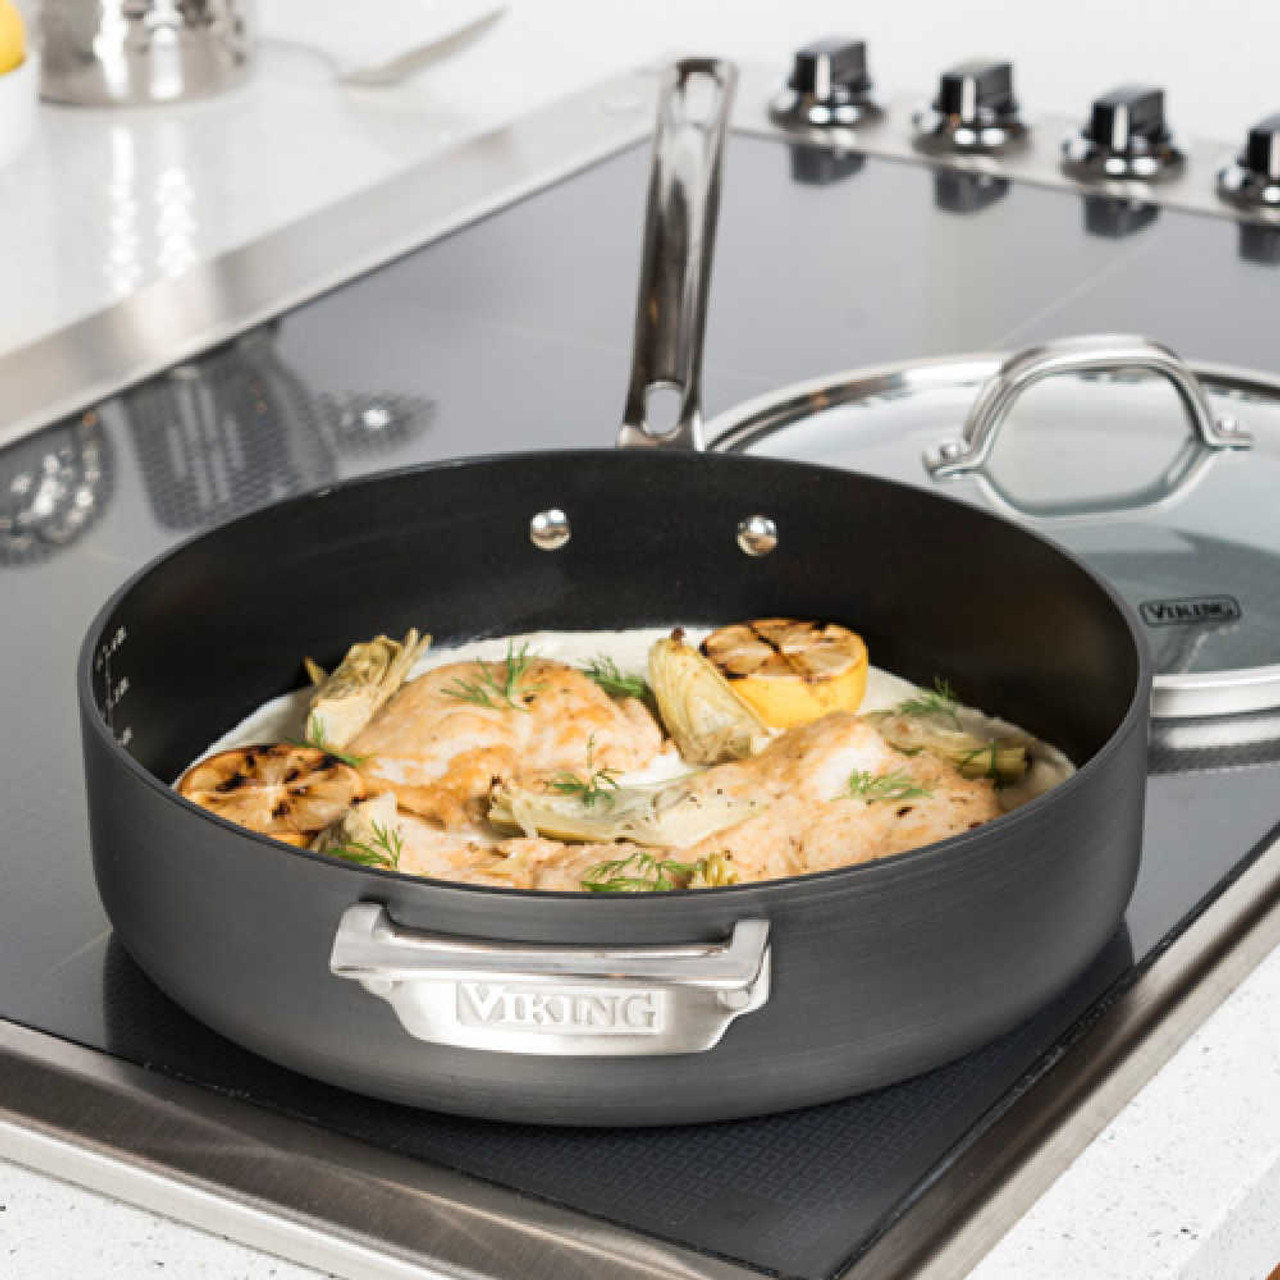 Viking Hard Anodized Nonstick 3-Quart Sauce Pan with Glass Lid